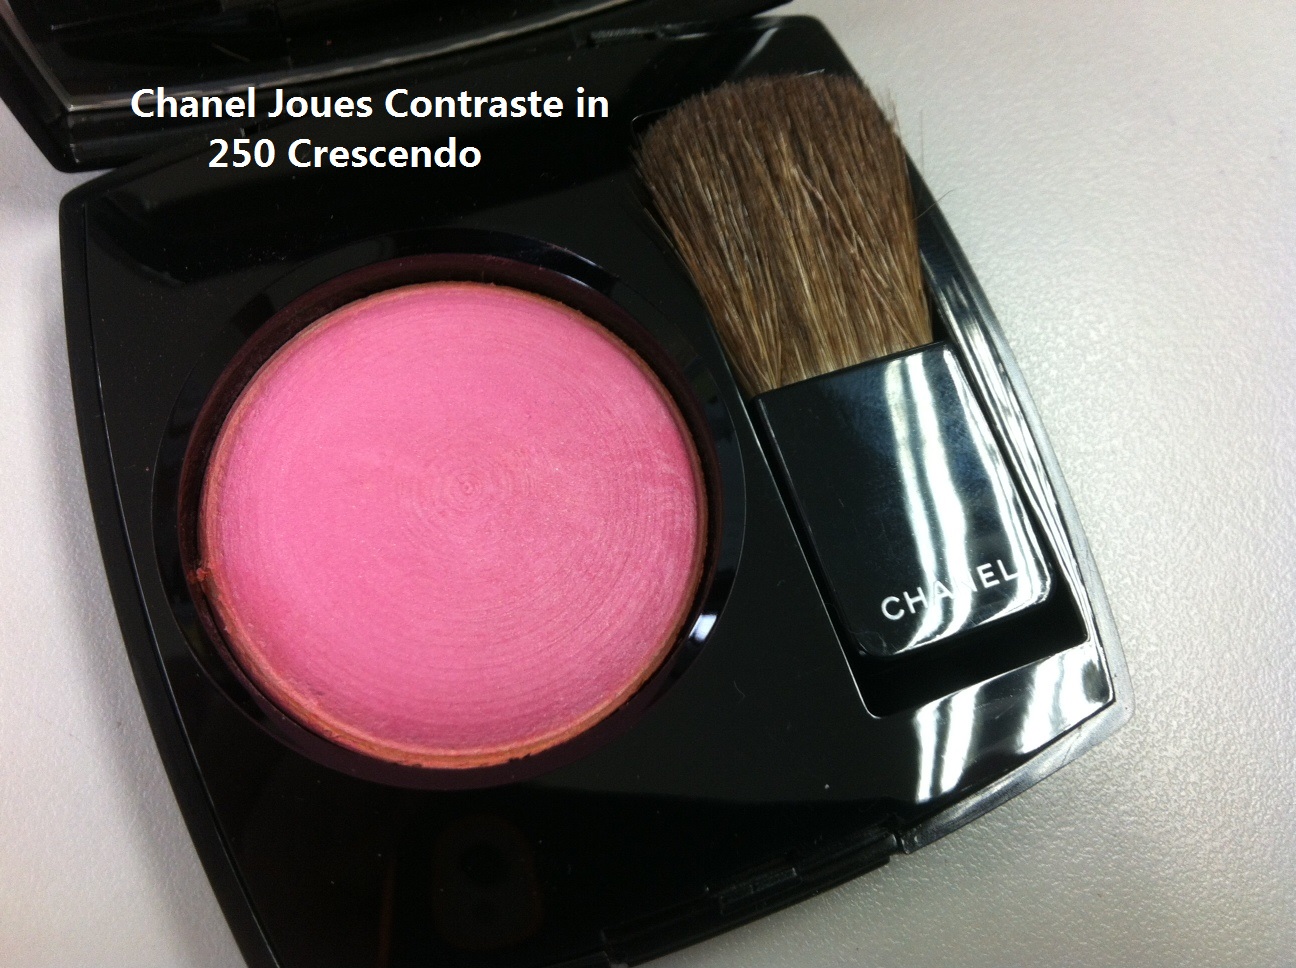 Chanel Joues Contraste blushes, Page 37